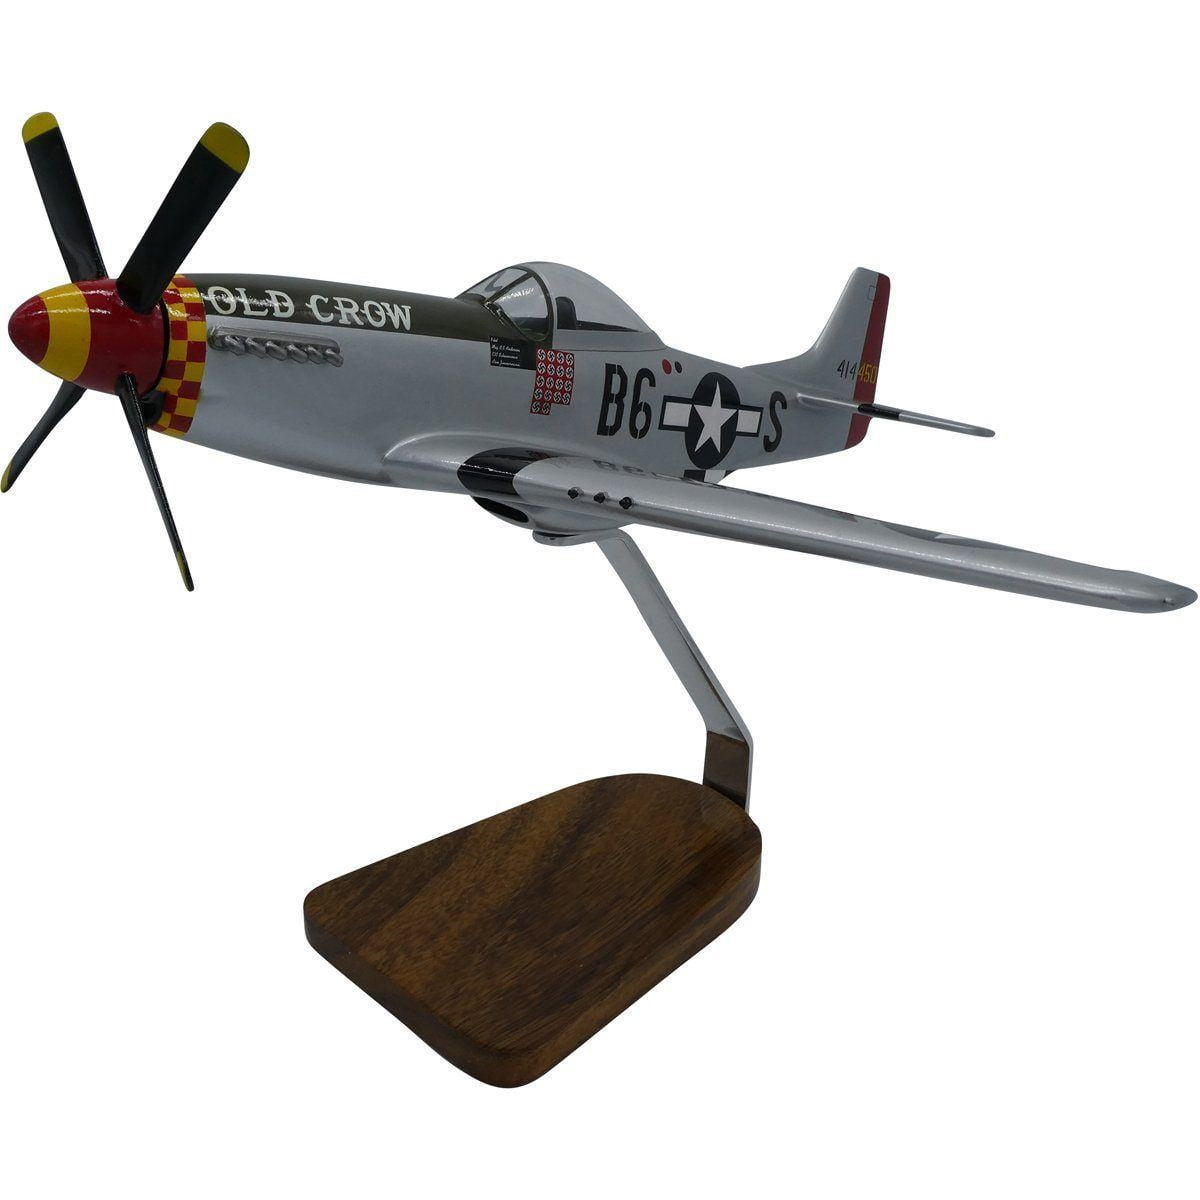  P  51  Mustang Clear Canopy  Open Edition Mahogany Model 